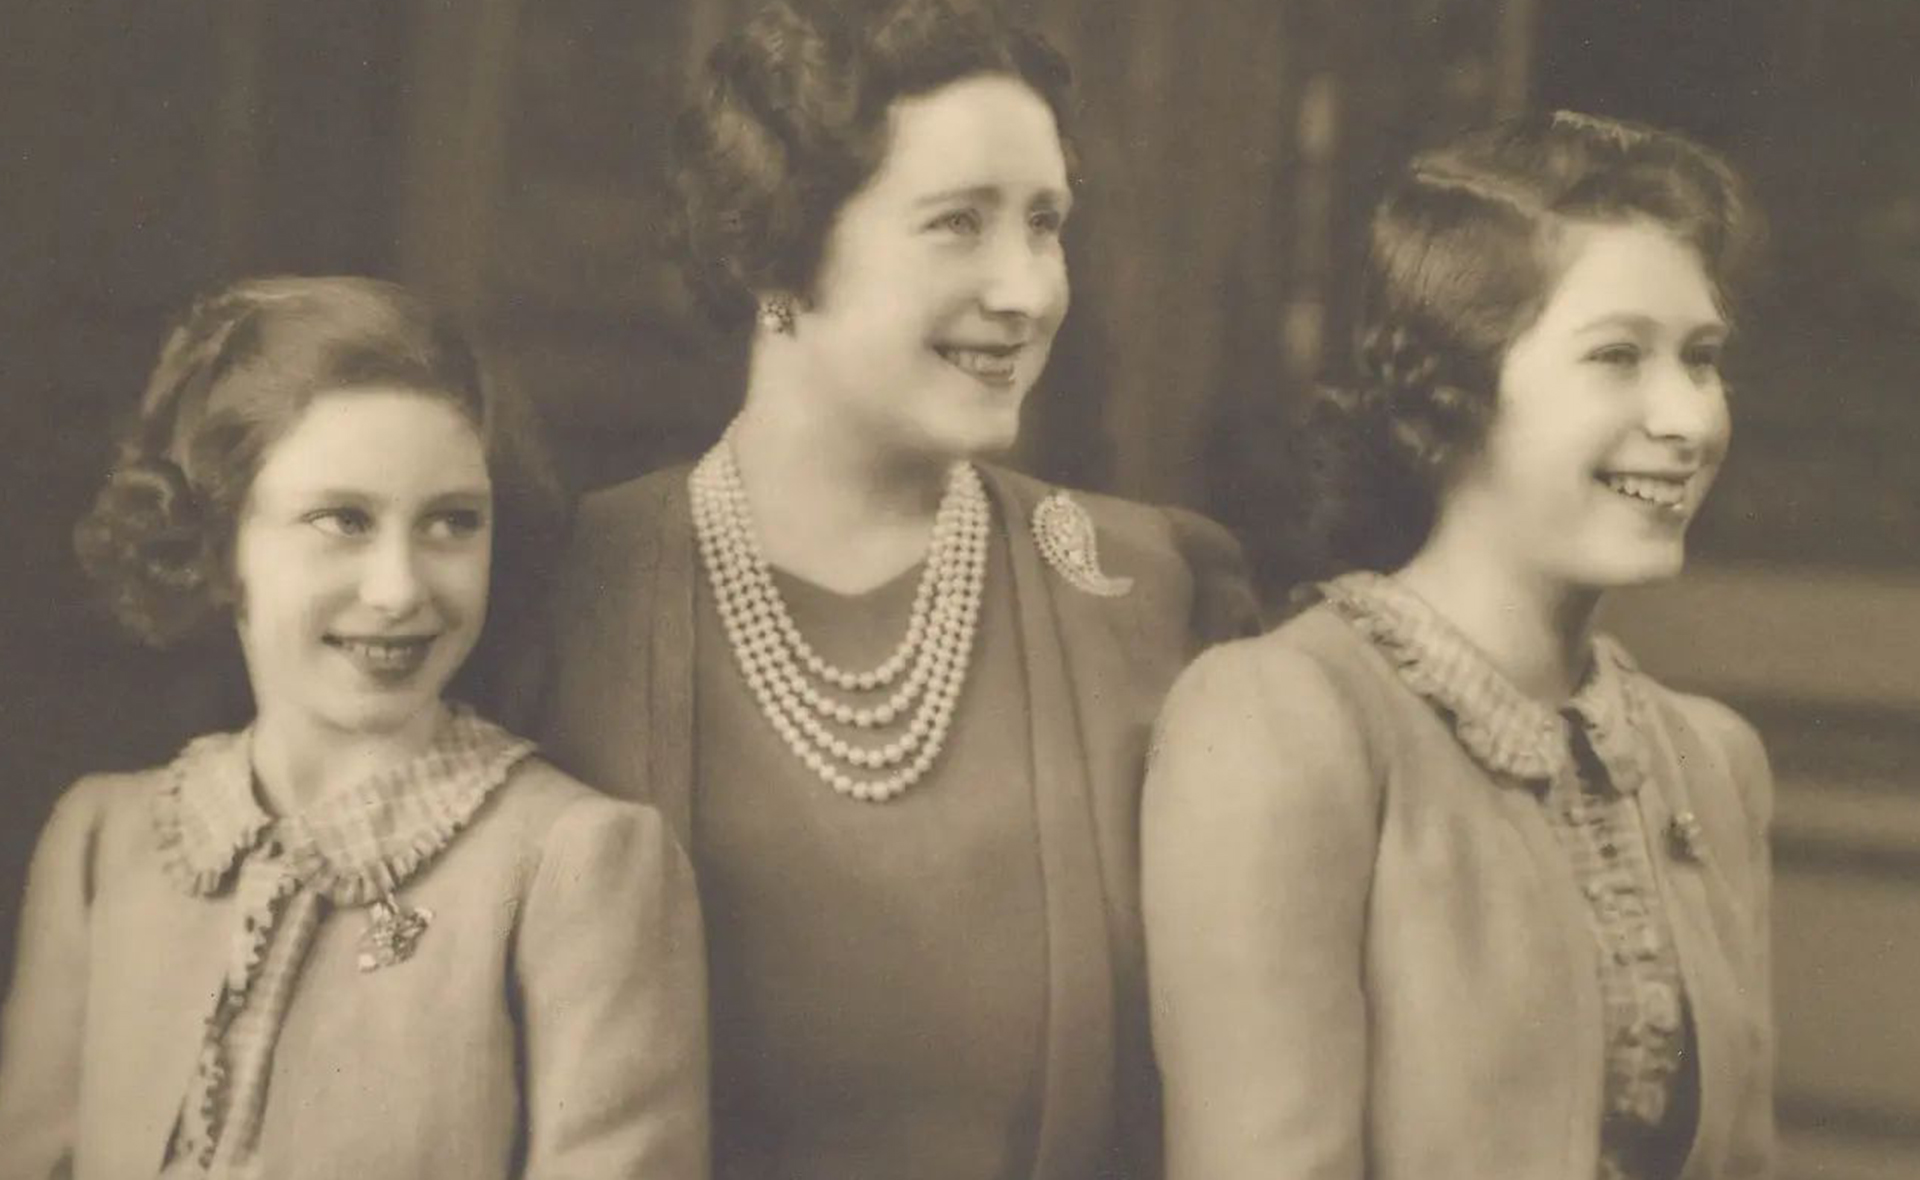 The Queen leads royals celebrating UK Mother’s Day with an emotional childhood throwback of her late mother and sister